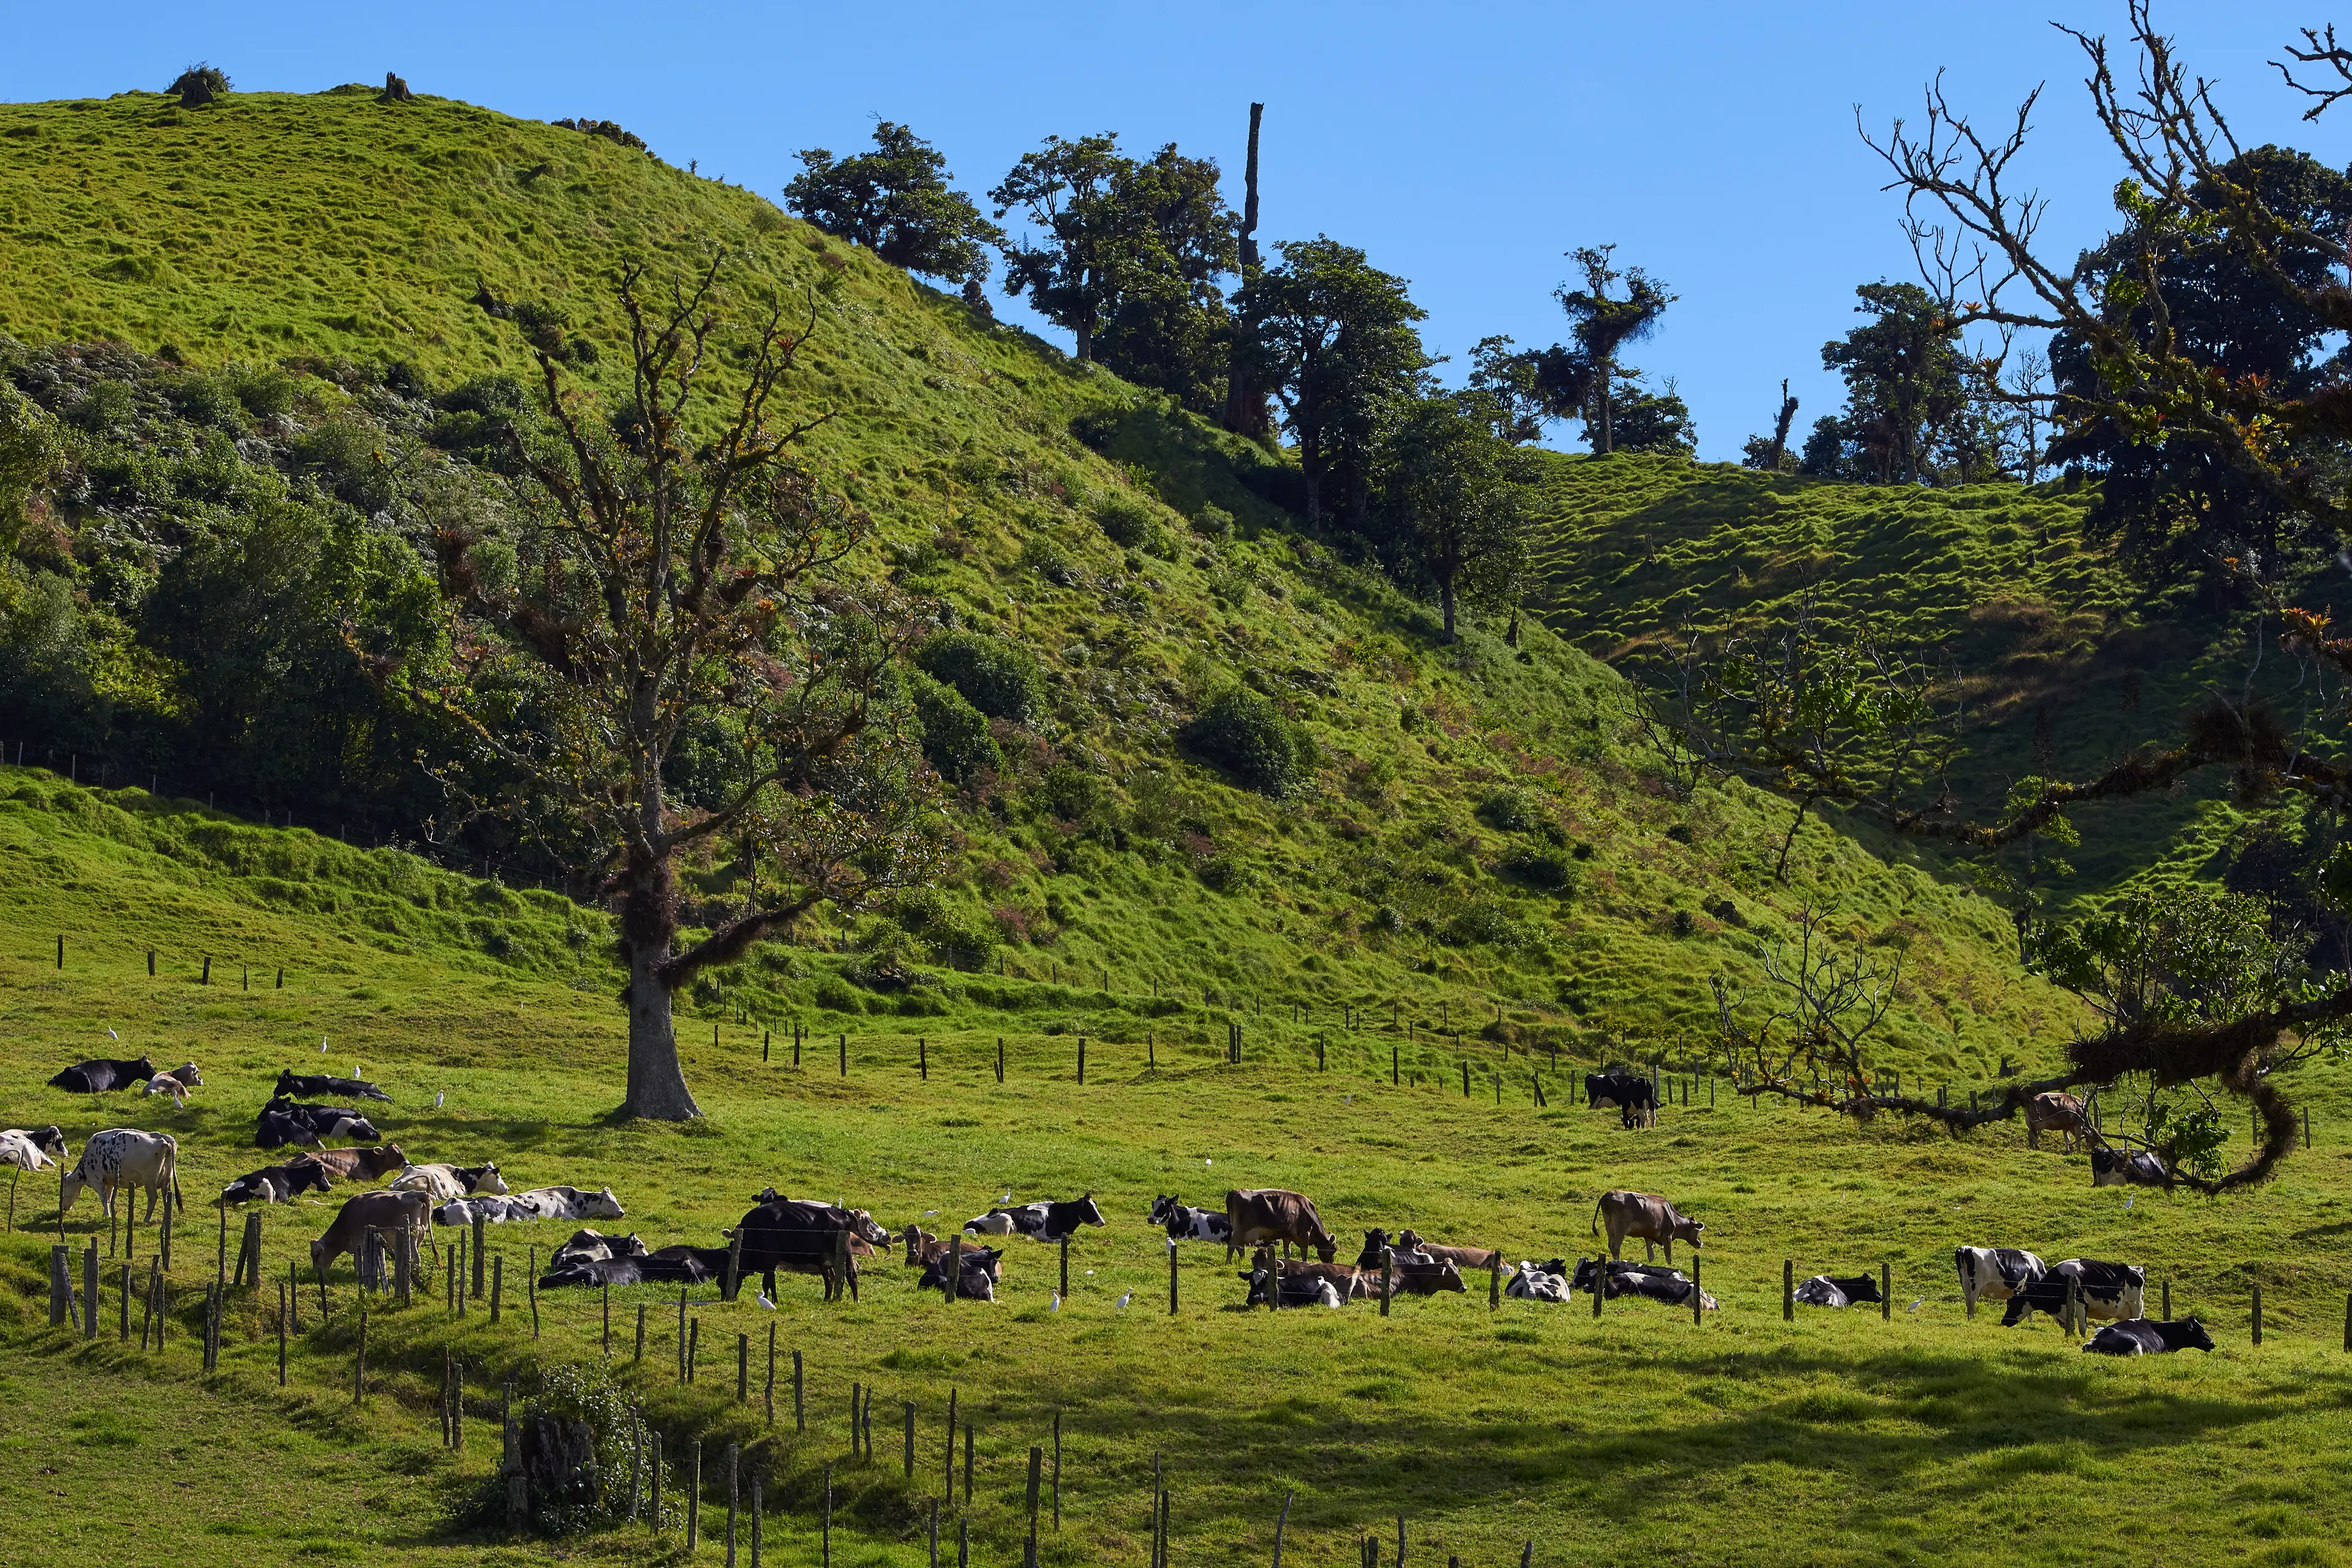 Cows in green pastures